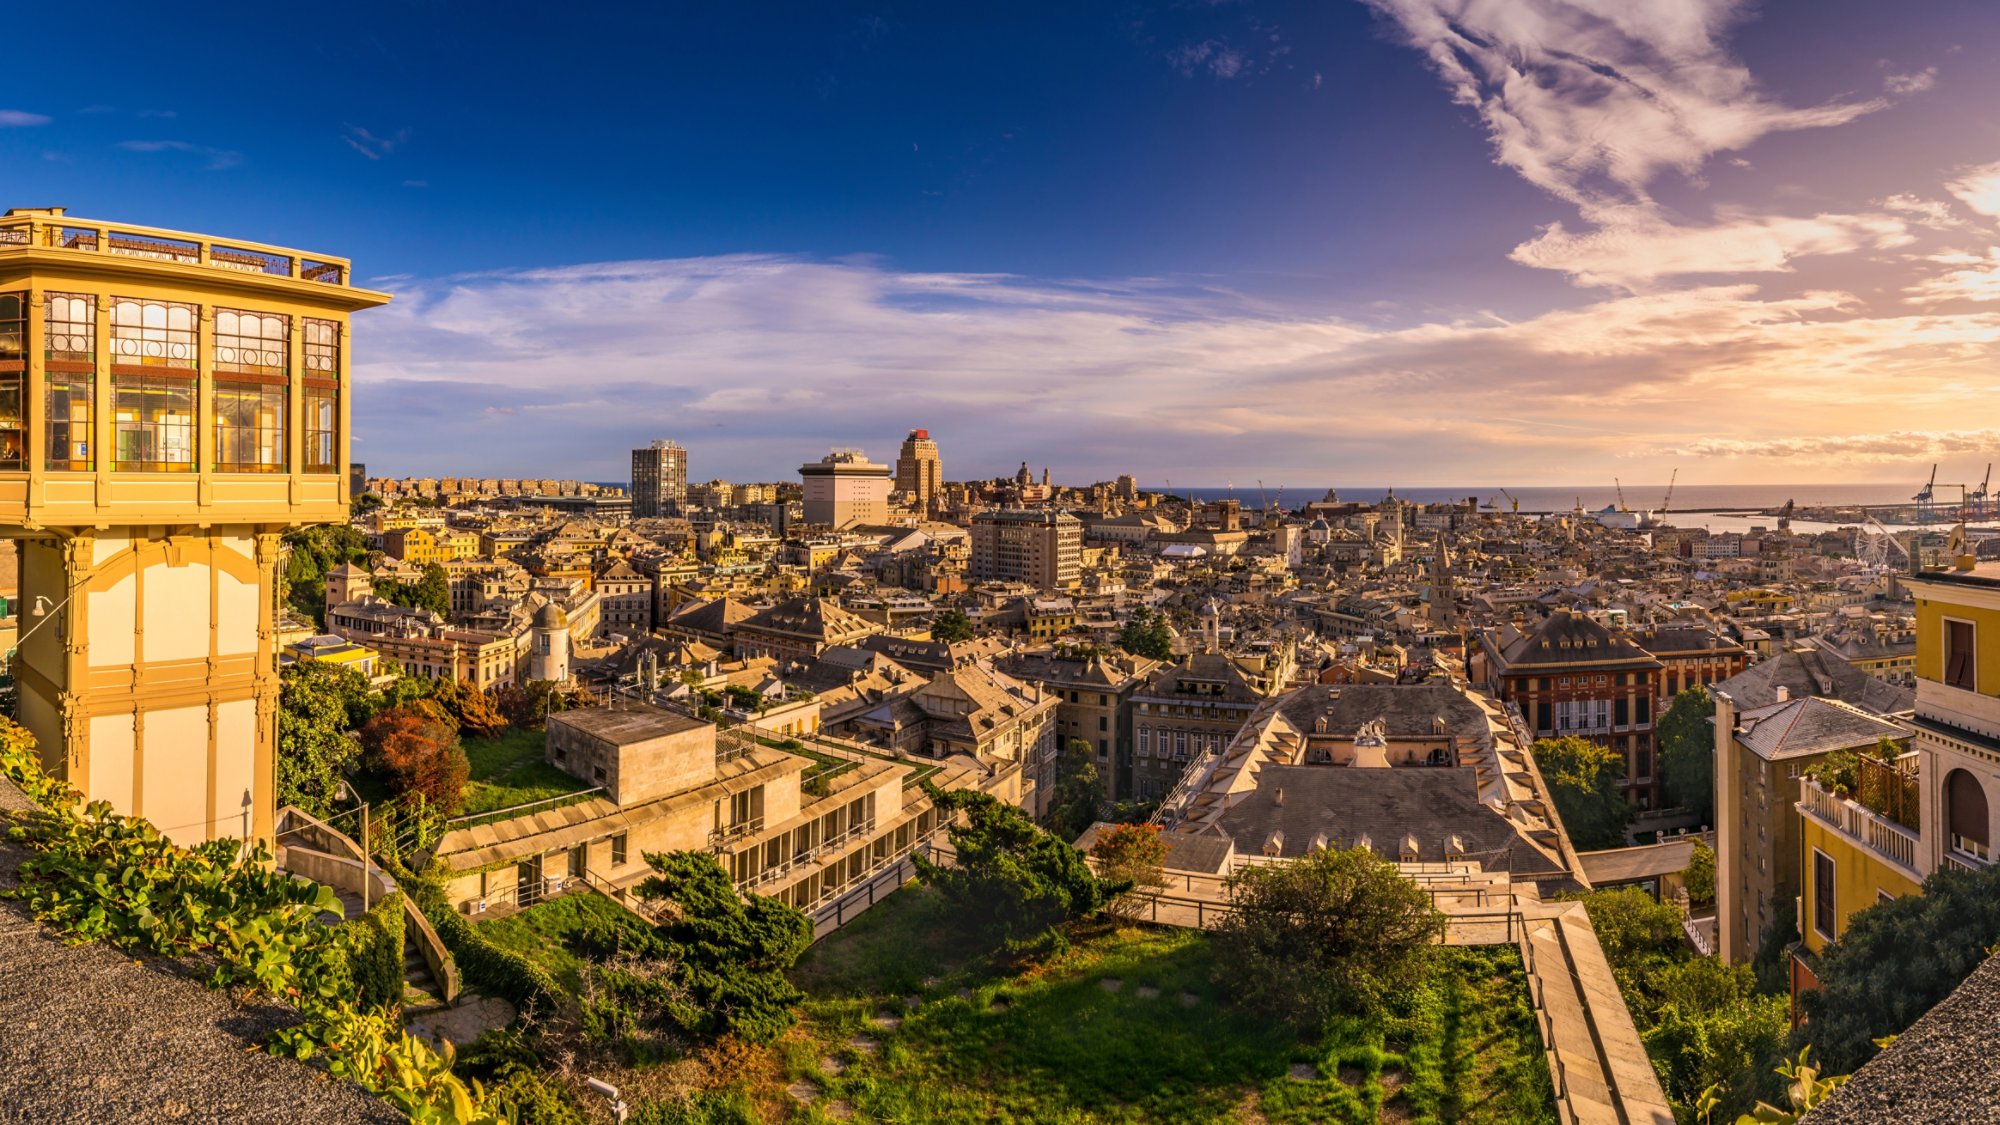 View of Genoa at sunset from "Spianata Castelletto", Italy